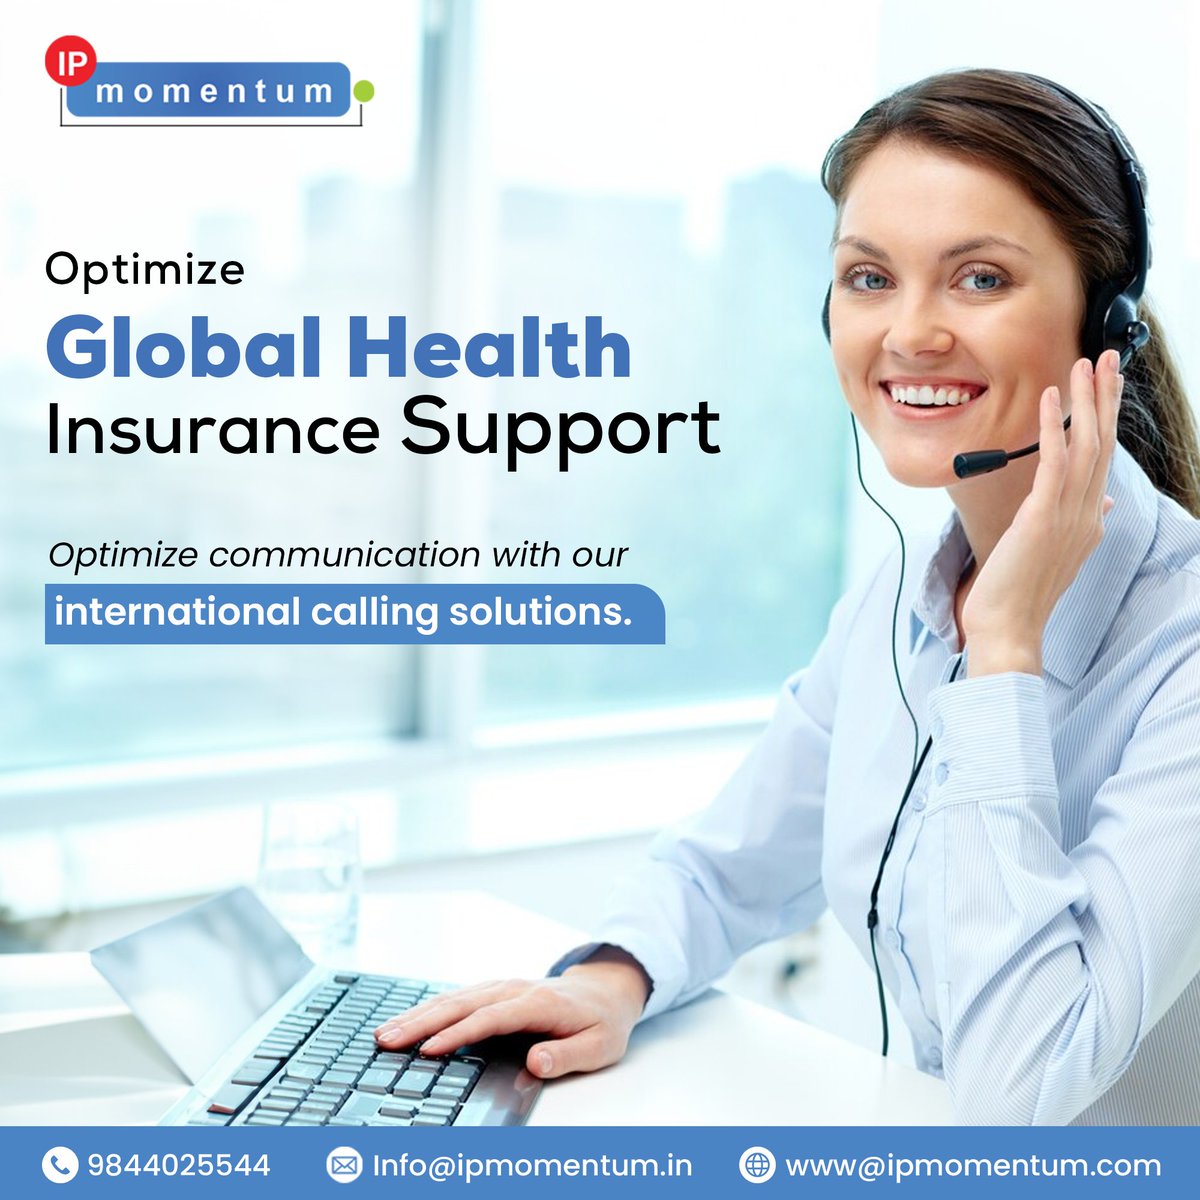 Revolutionize health insurance support worldwide with our cutting-edge international calling solutions! IPMomentum.com Strengthen coverage collaboration and ensure 24/7 global assistance with #IPMomentum. #HealthInsurance #GlobalCoverage #CommunicationSolutions